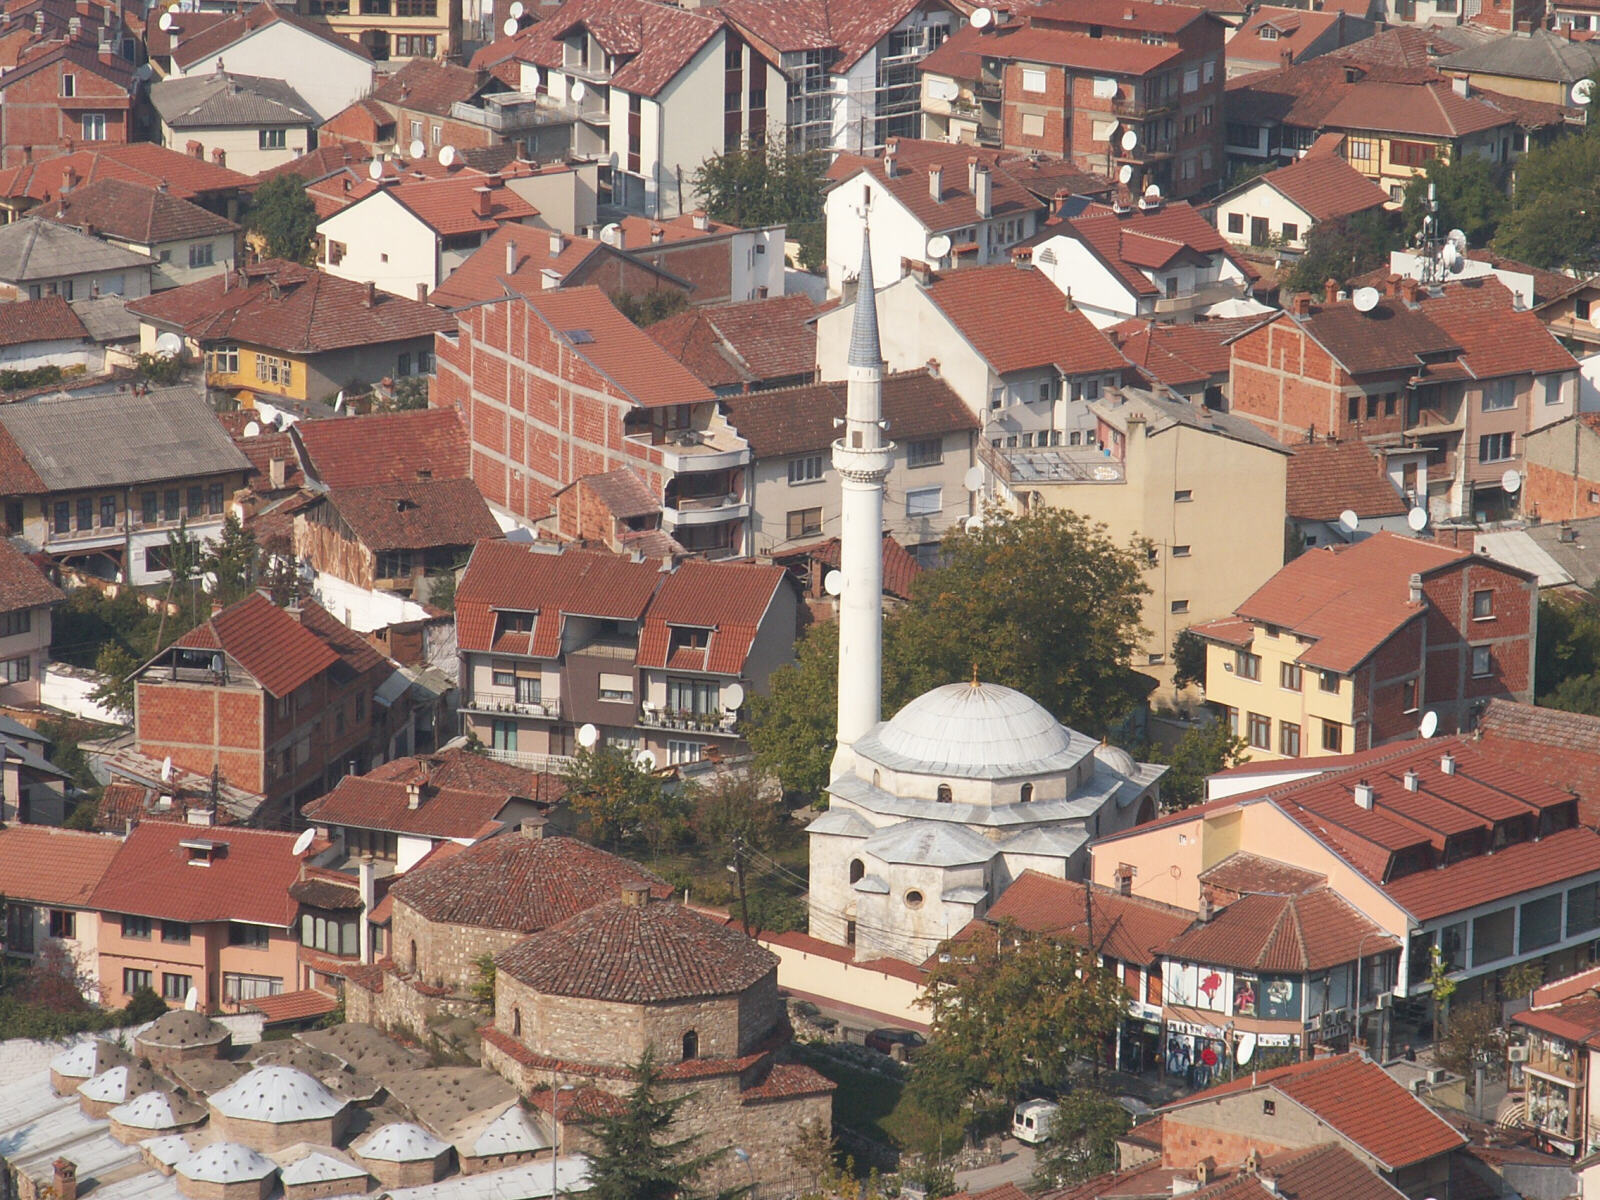 Hammam and mosque from the hill in Prizren, Kosovo